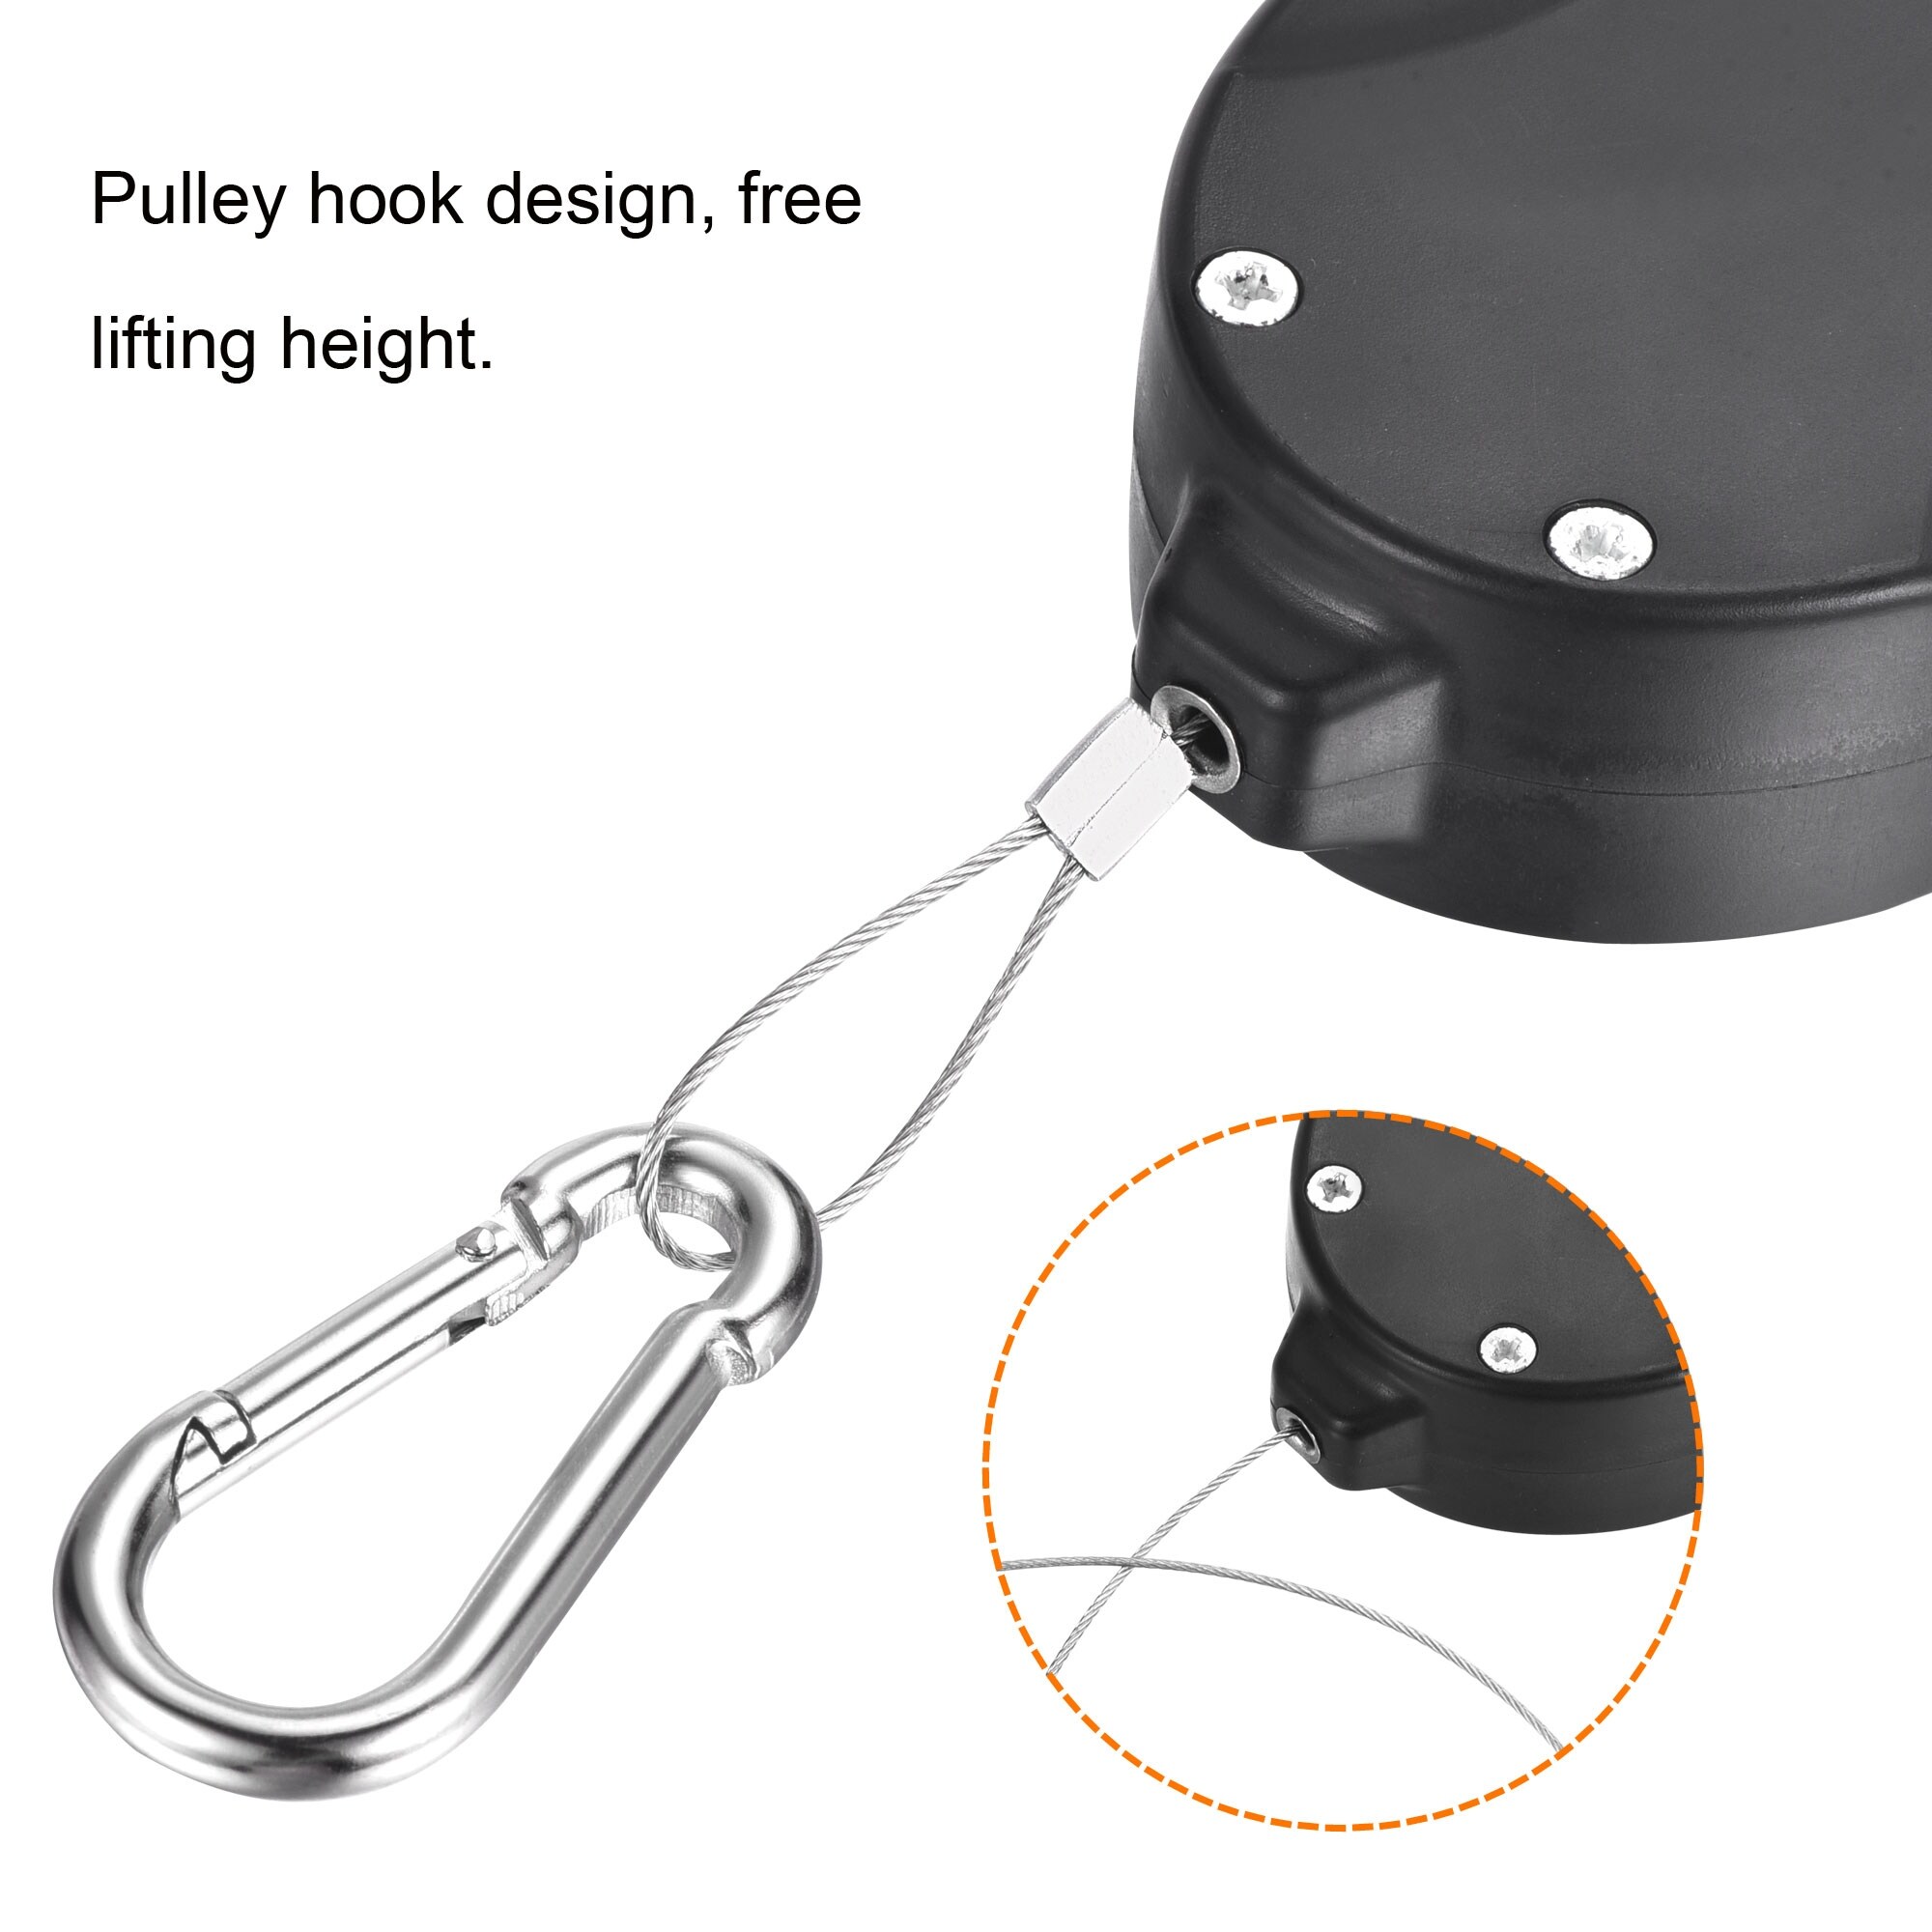 https://ak1.ostkcdn.com/images/products/is/images/direct/b33c01122893a722b60f49be26c41b3c4ffeb768/Retractable-Plant-Pulley-Adjustable-Hanger-160cm-for-Garden-Hanging-Basket-Pots.jpg